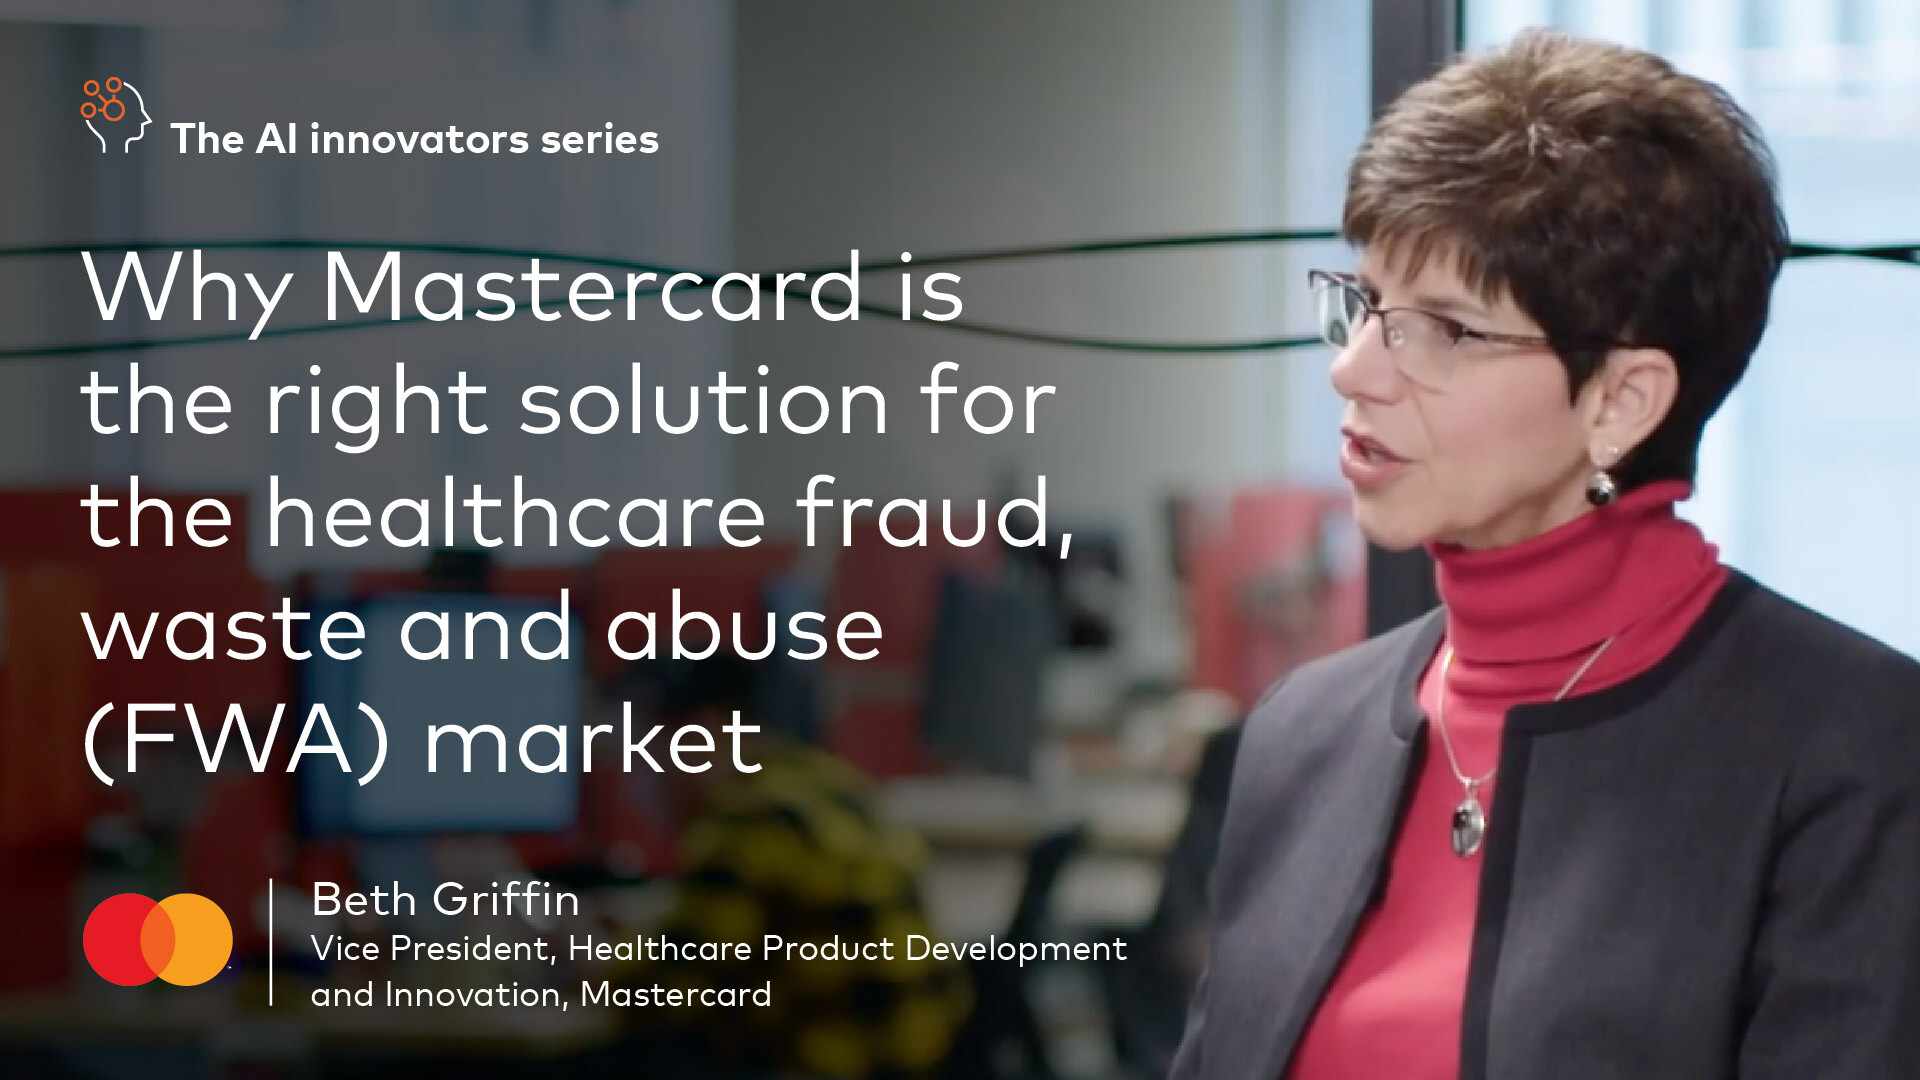 Insight 01: Why Mastercard is the right solution for the healthcare fraud, waste and abuse (FWA) market